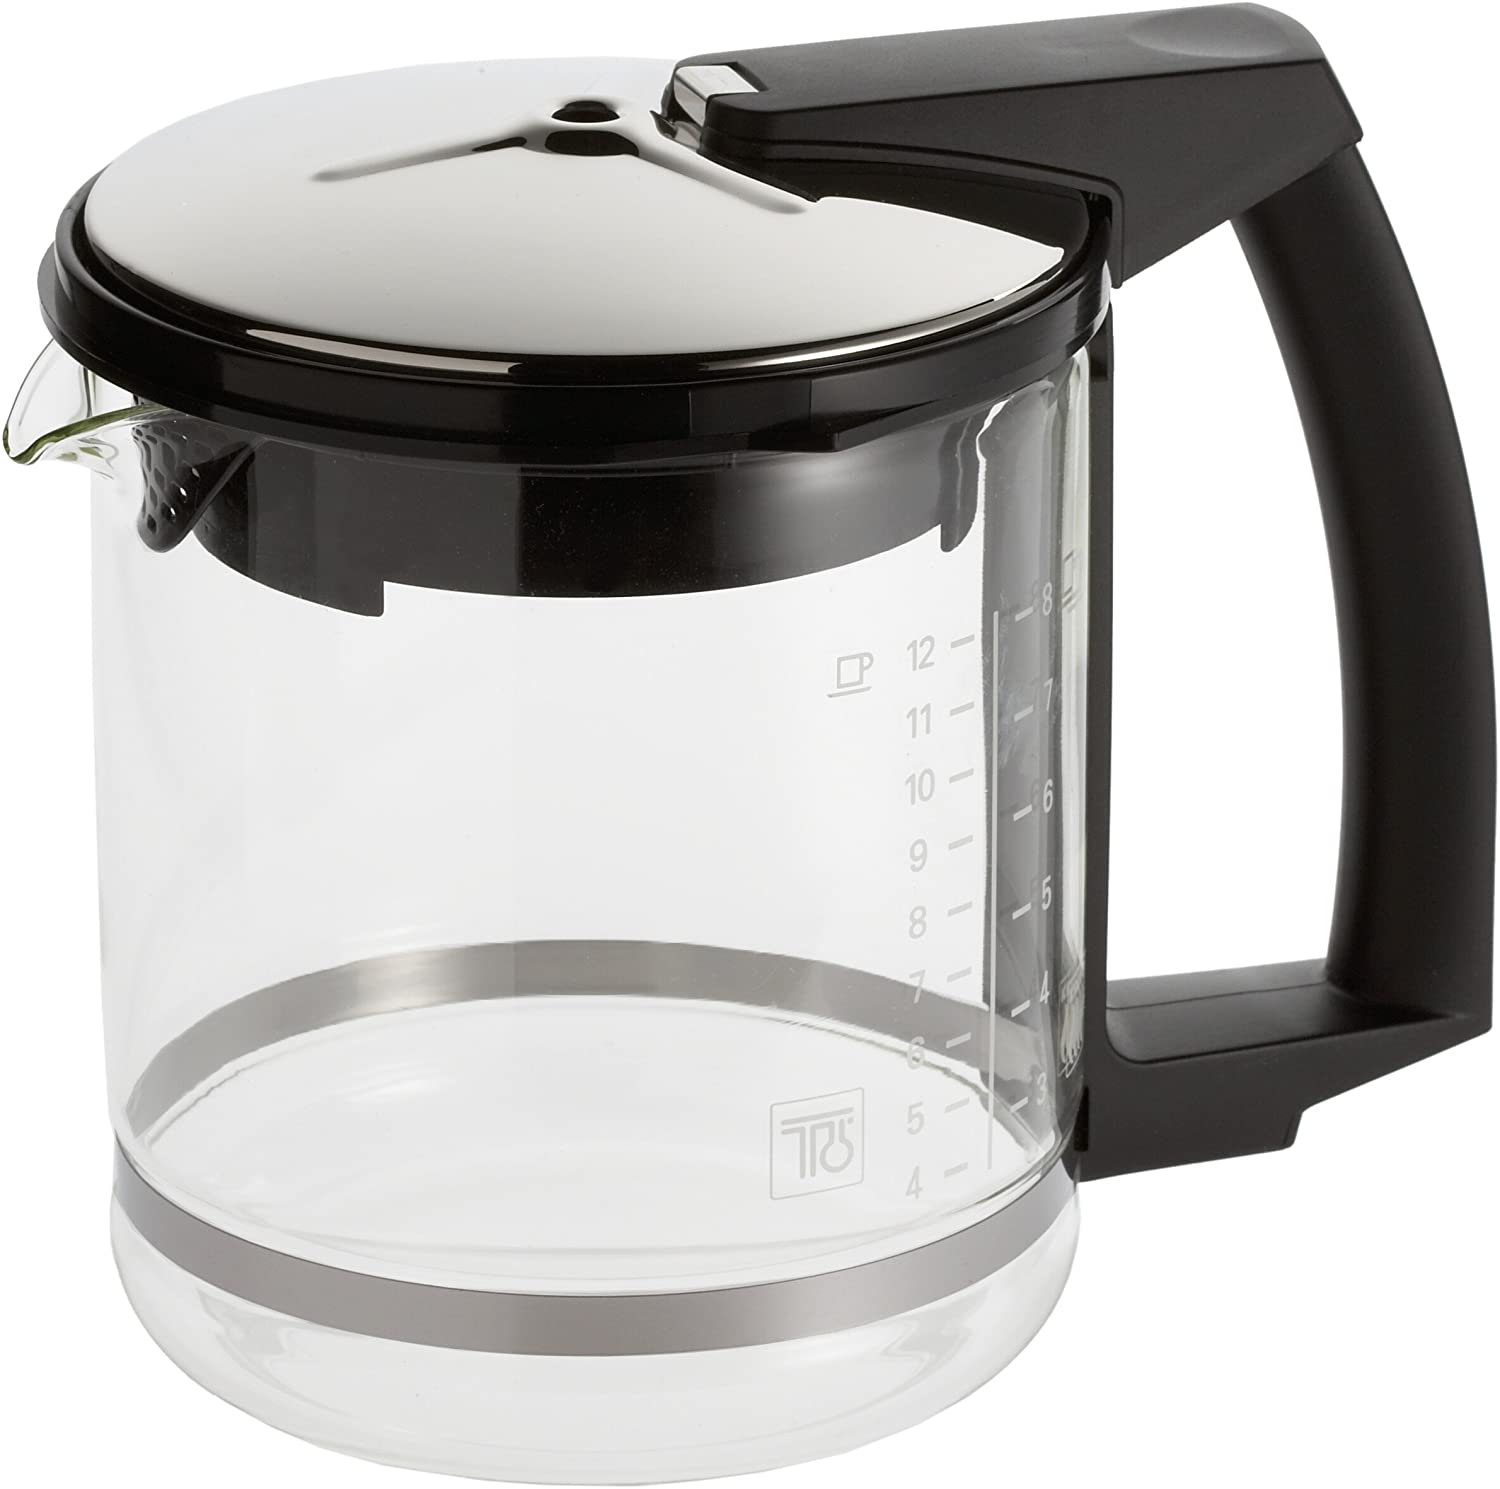 Krups glass jug with handle 046.42 (shipped without cover)